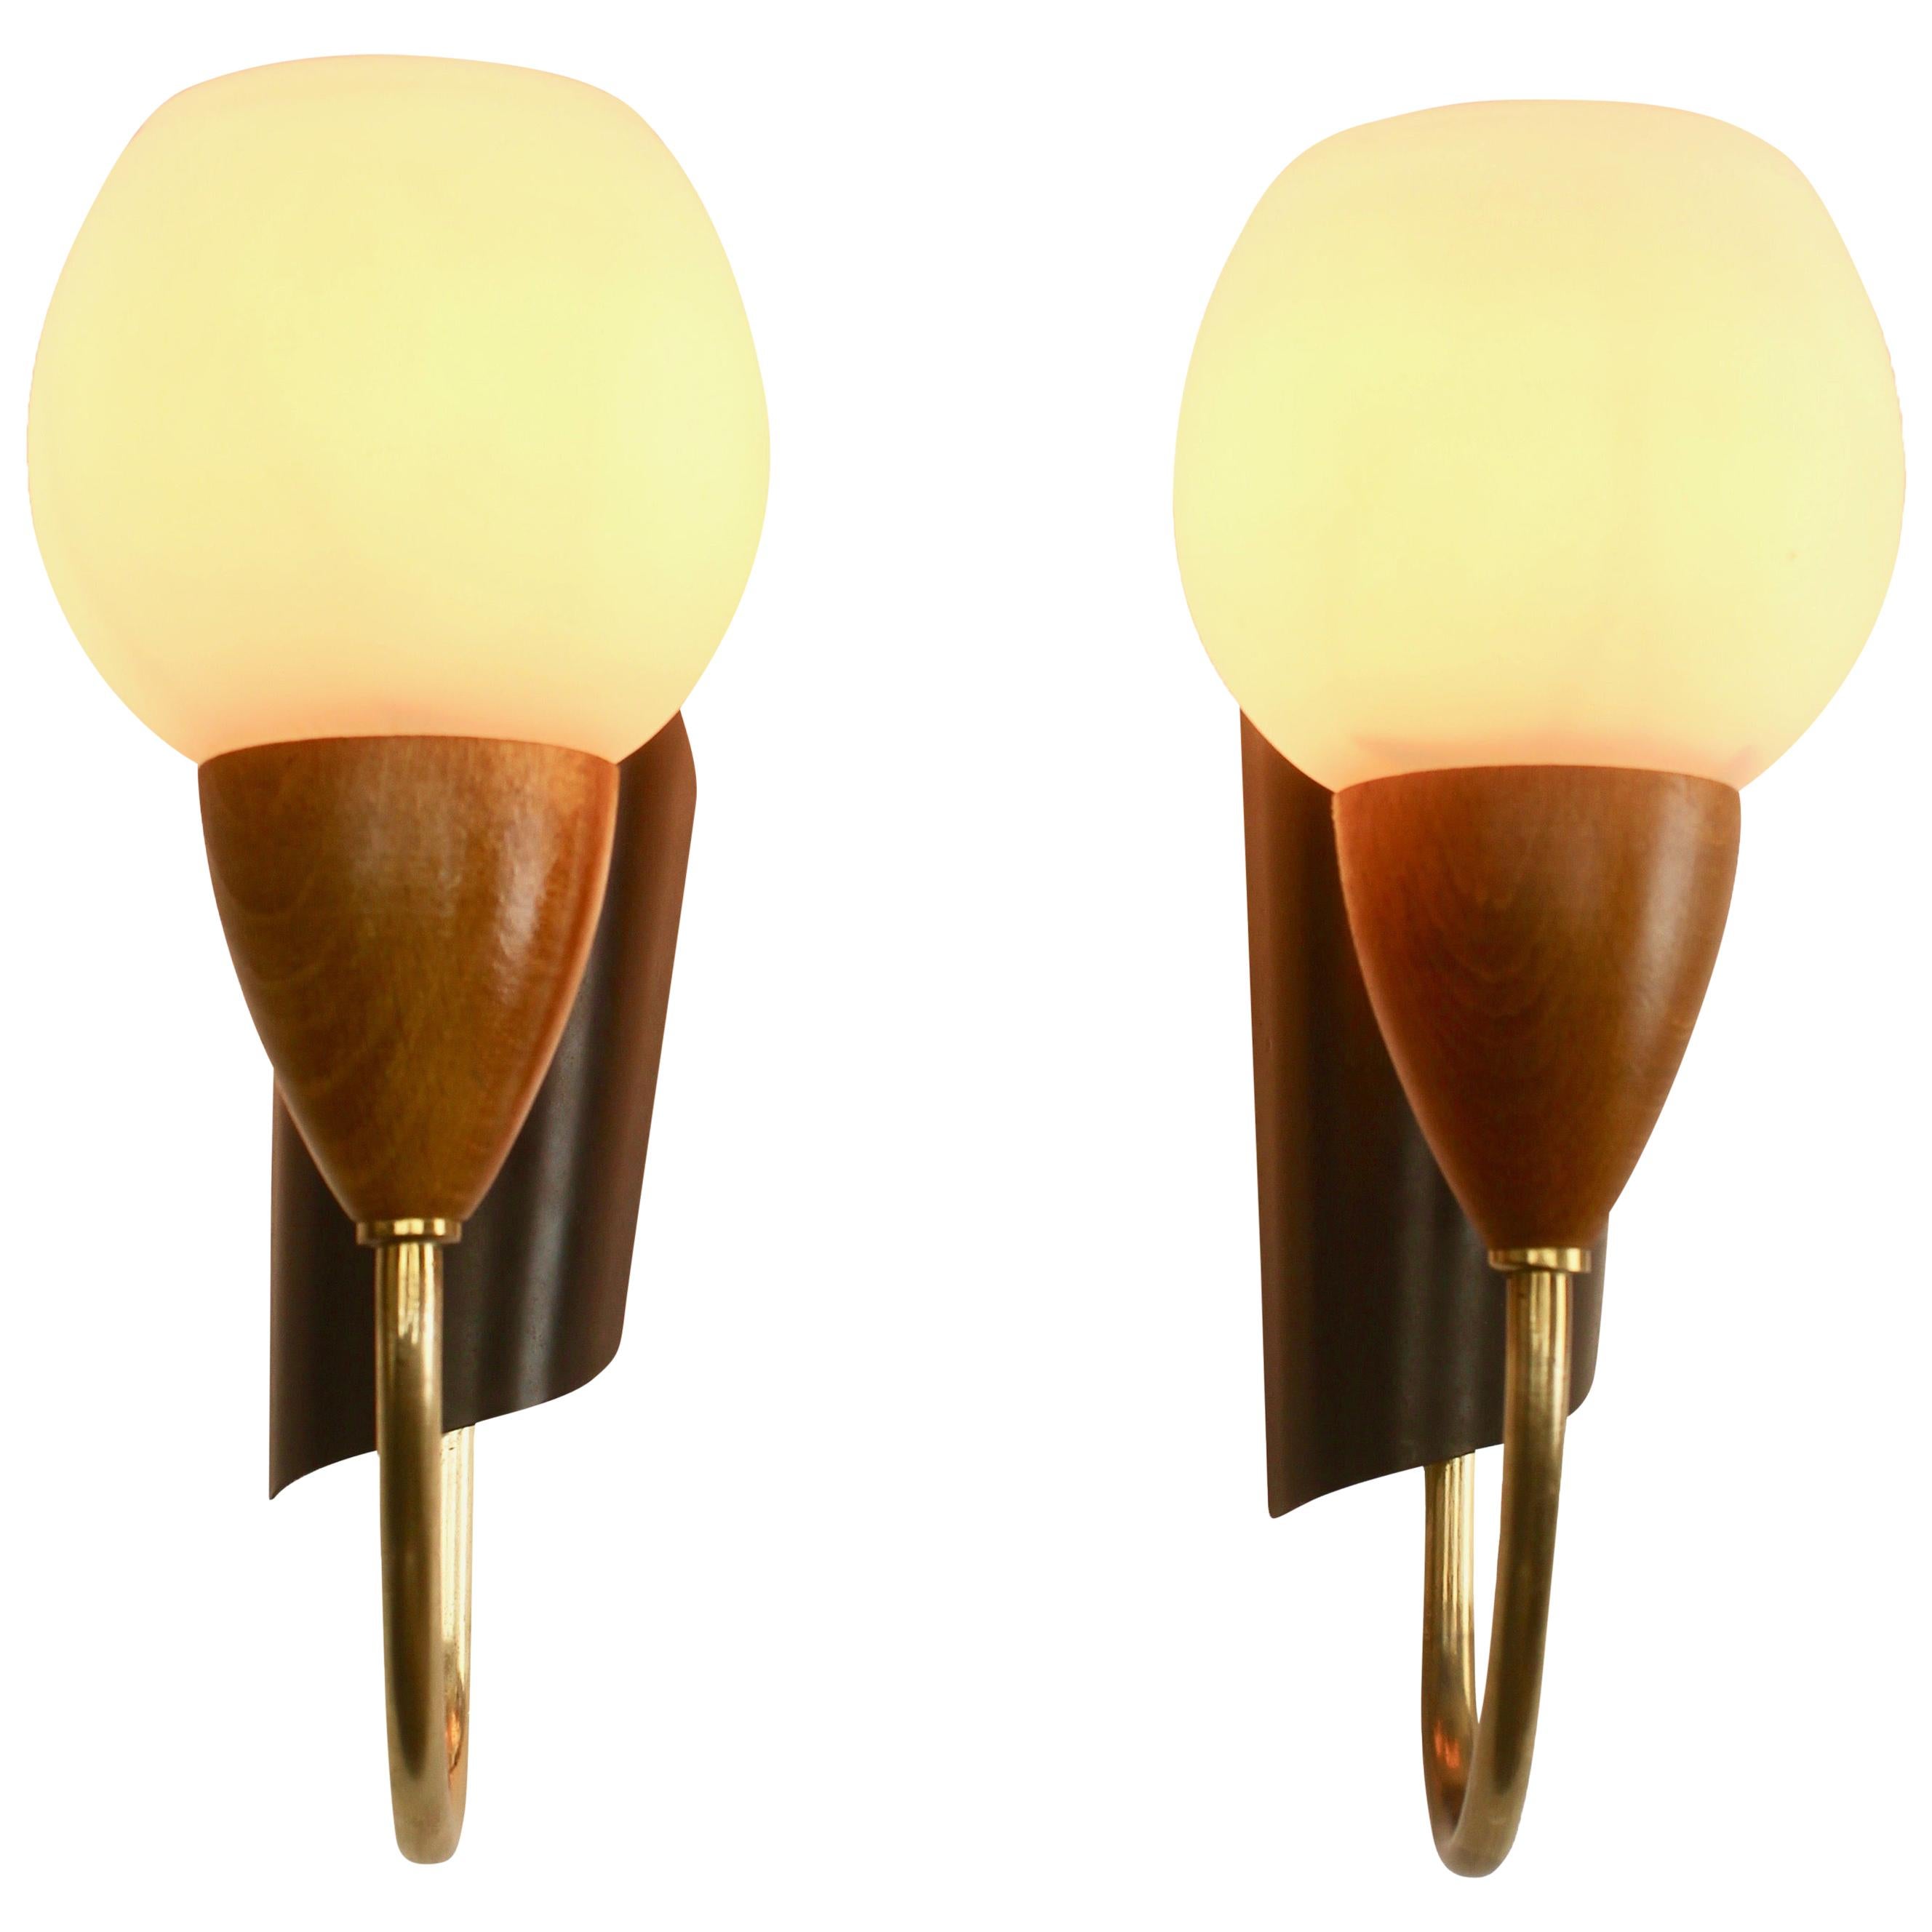 Vintage Pair of 1 Arms Wall Mount Lamps in the Style of Stilnovo, Italian, 1960s